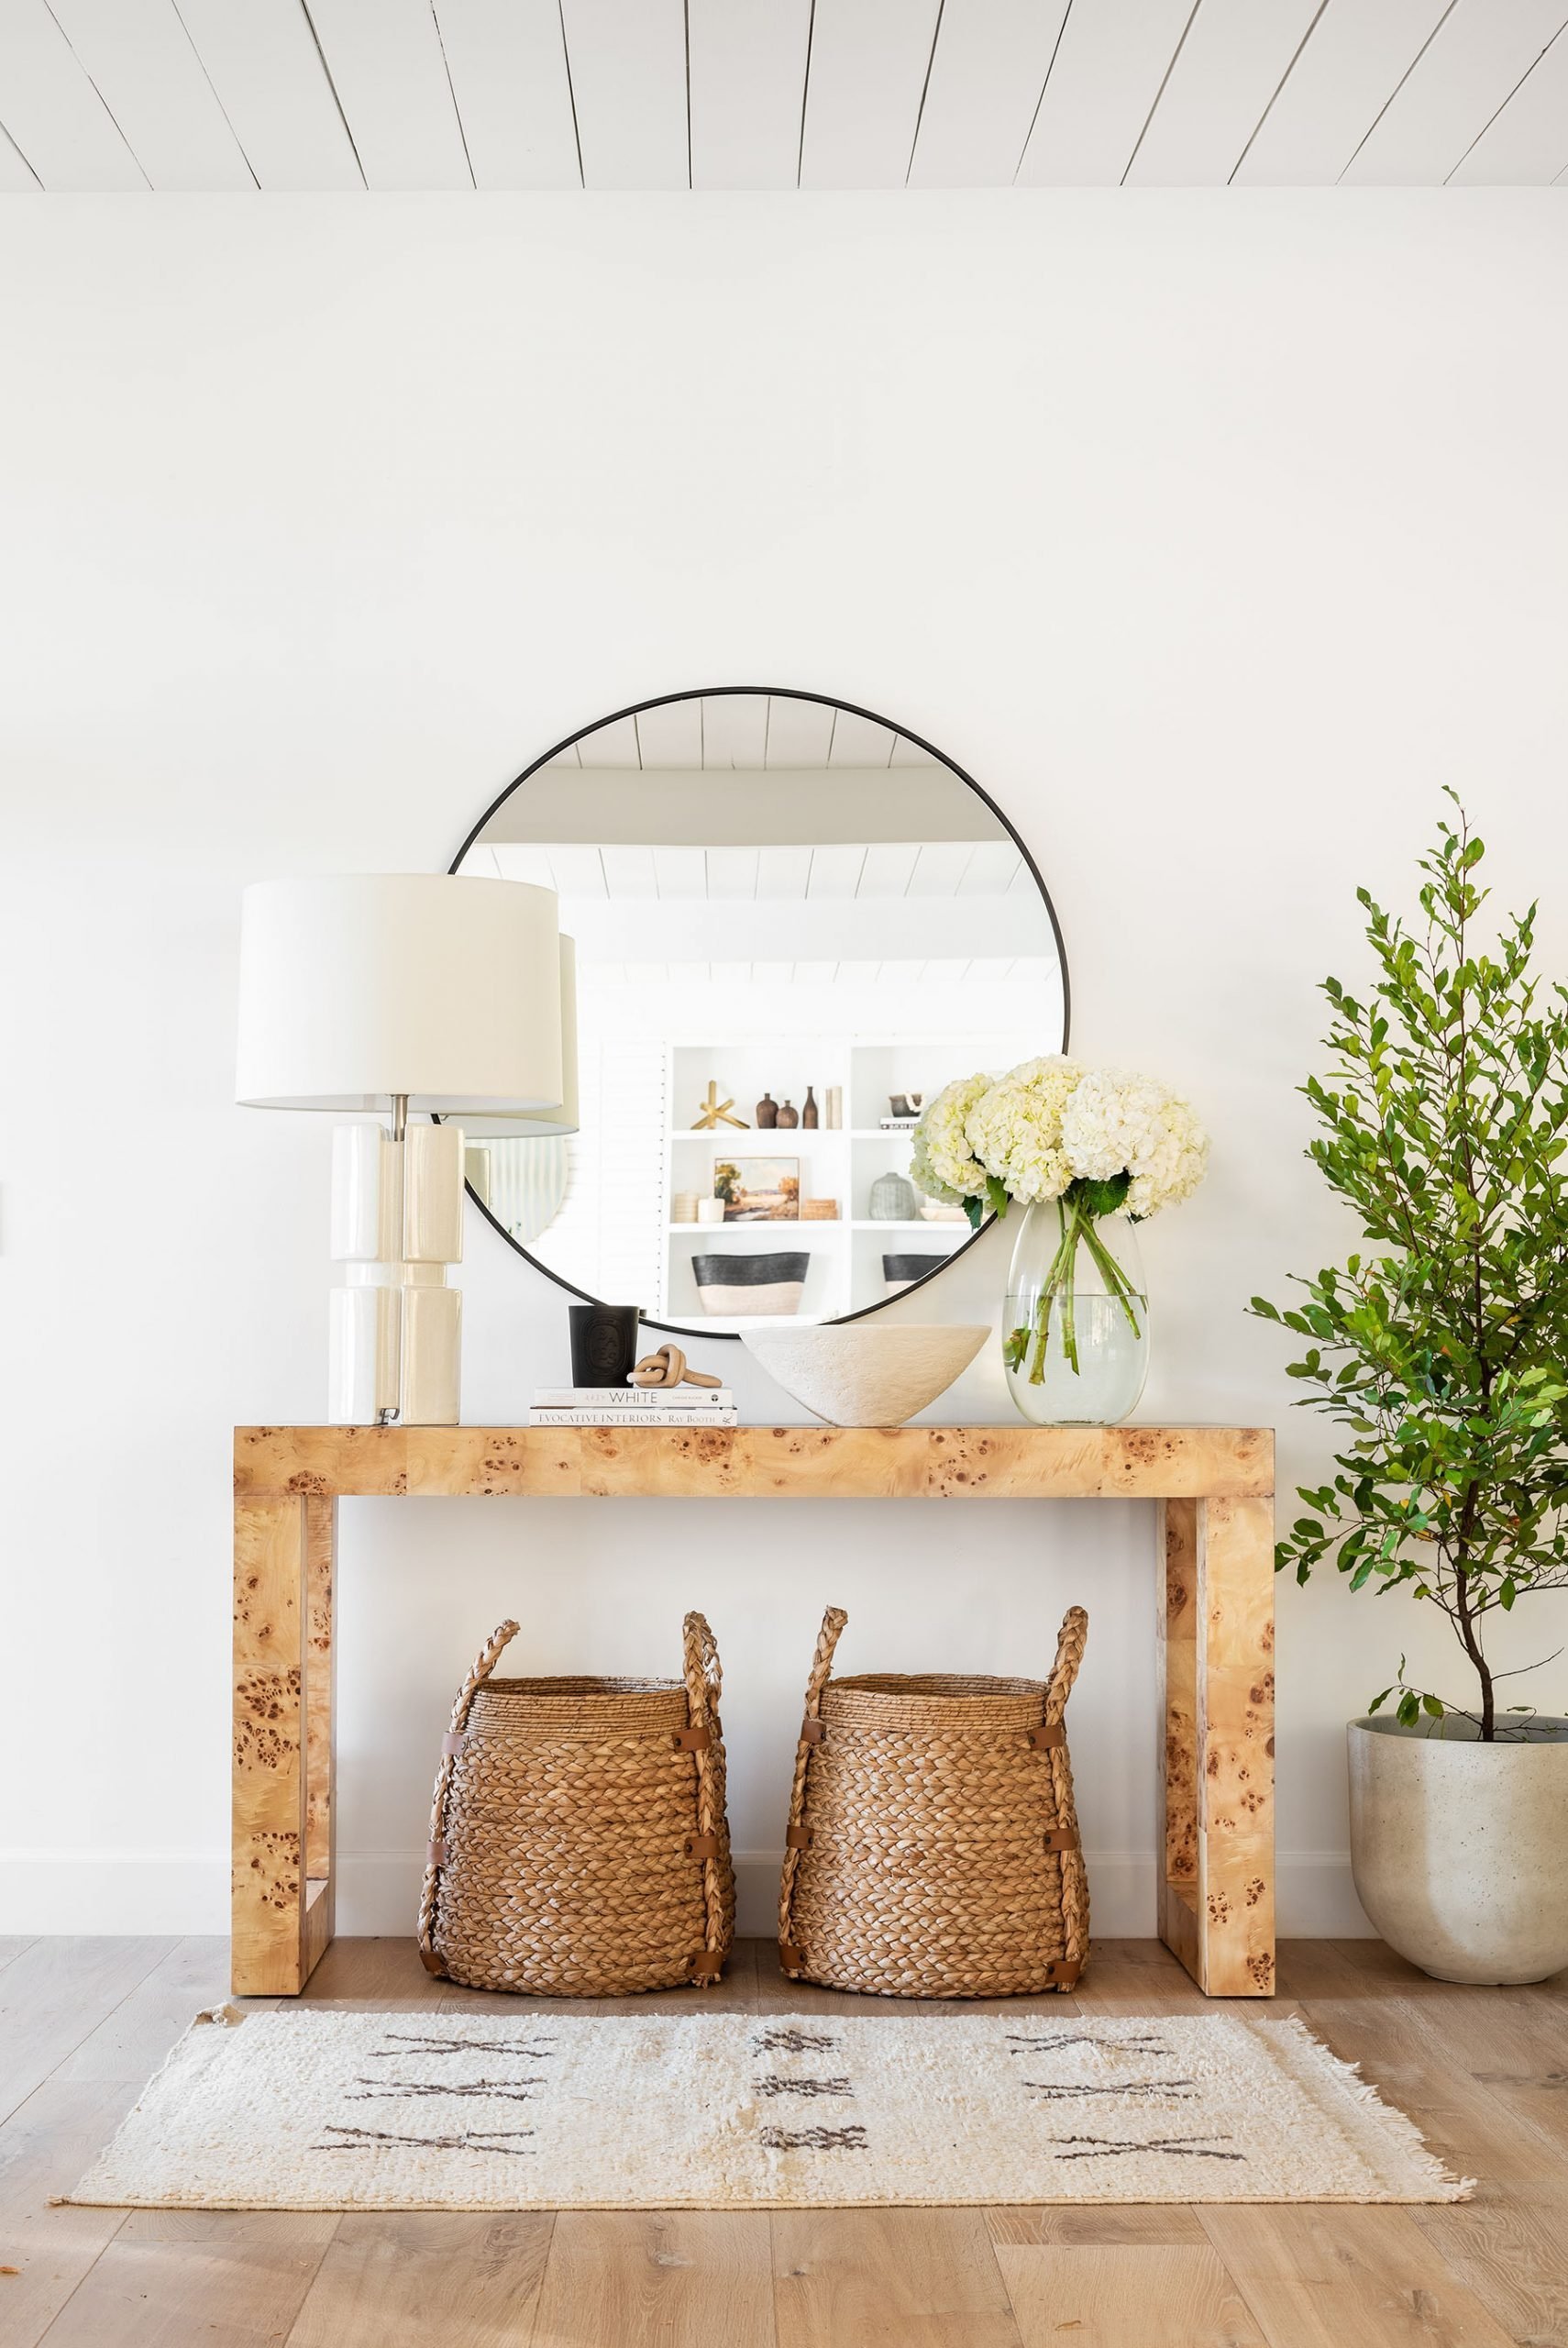 How to Decorate a Console Table